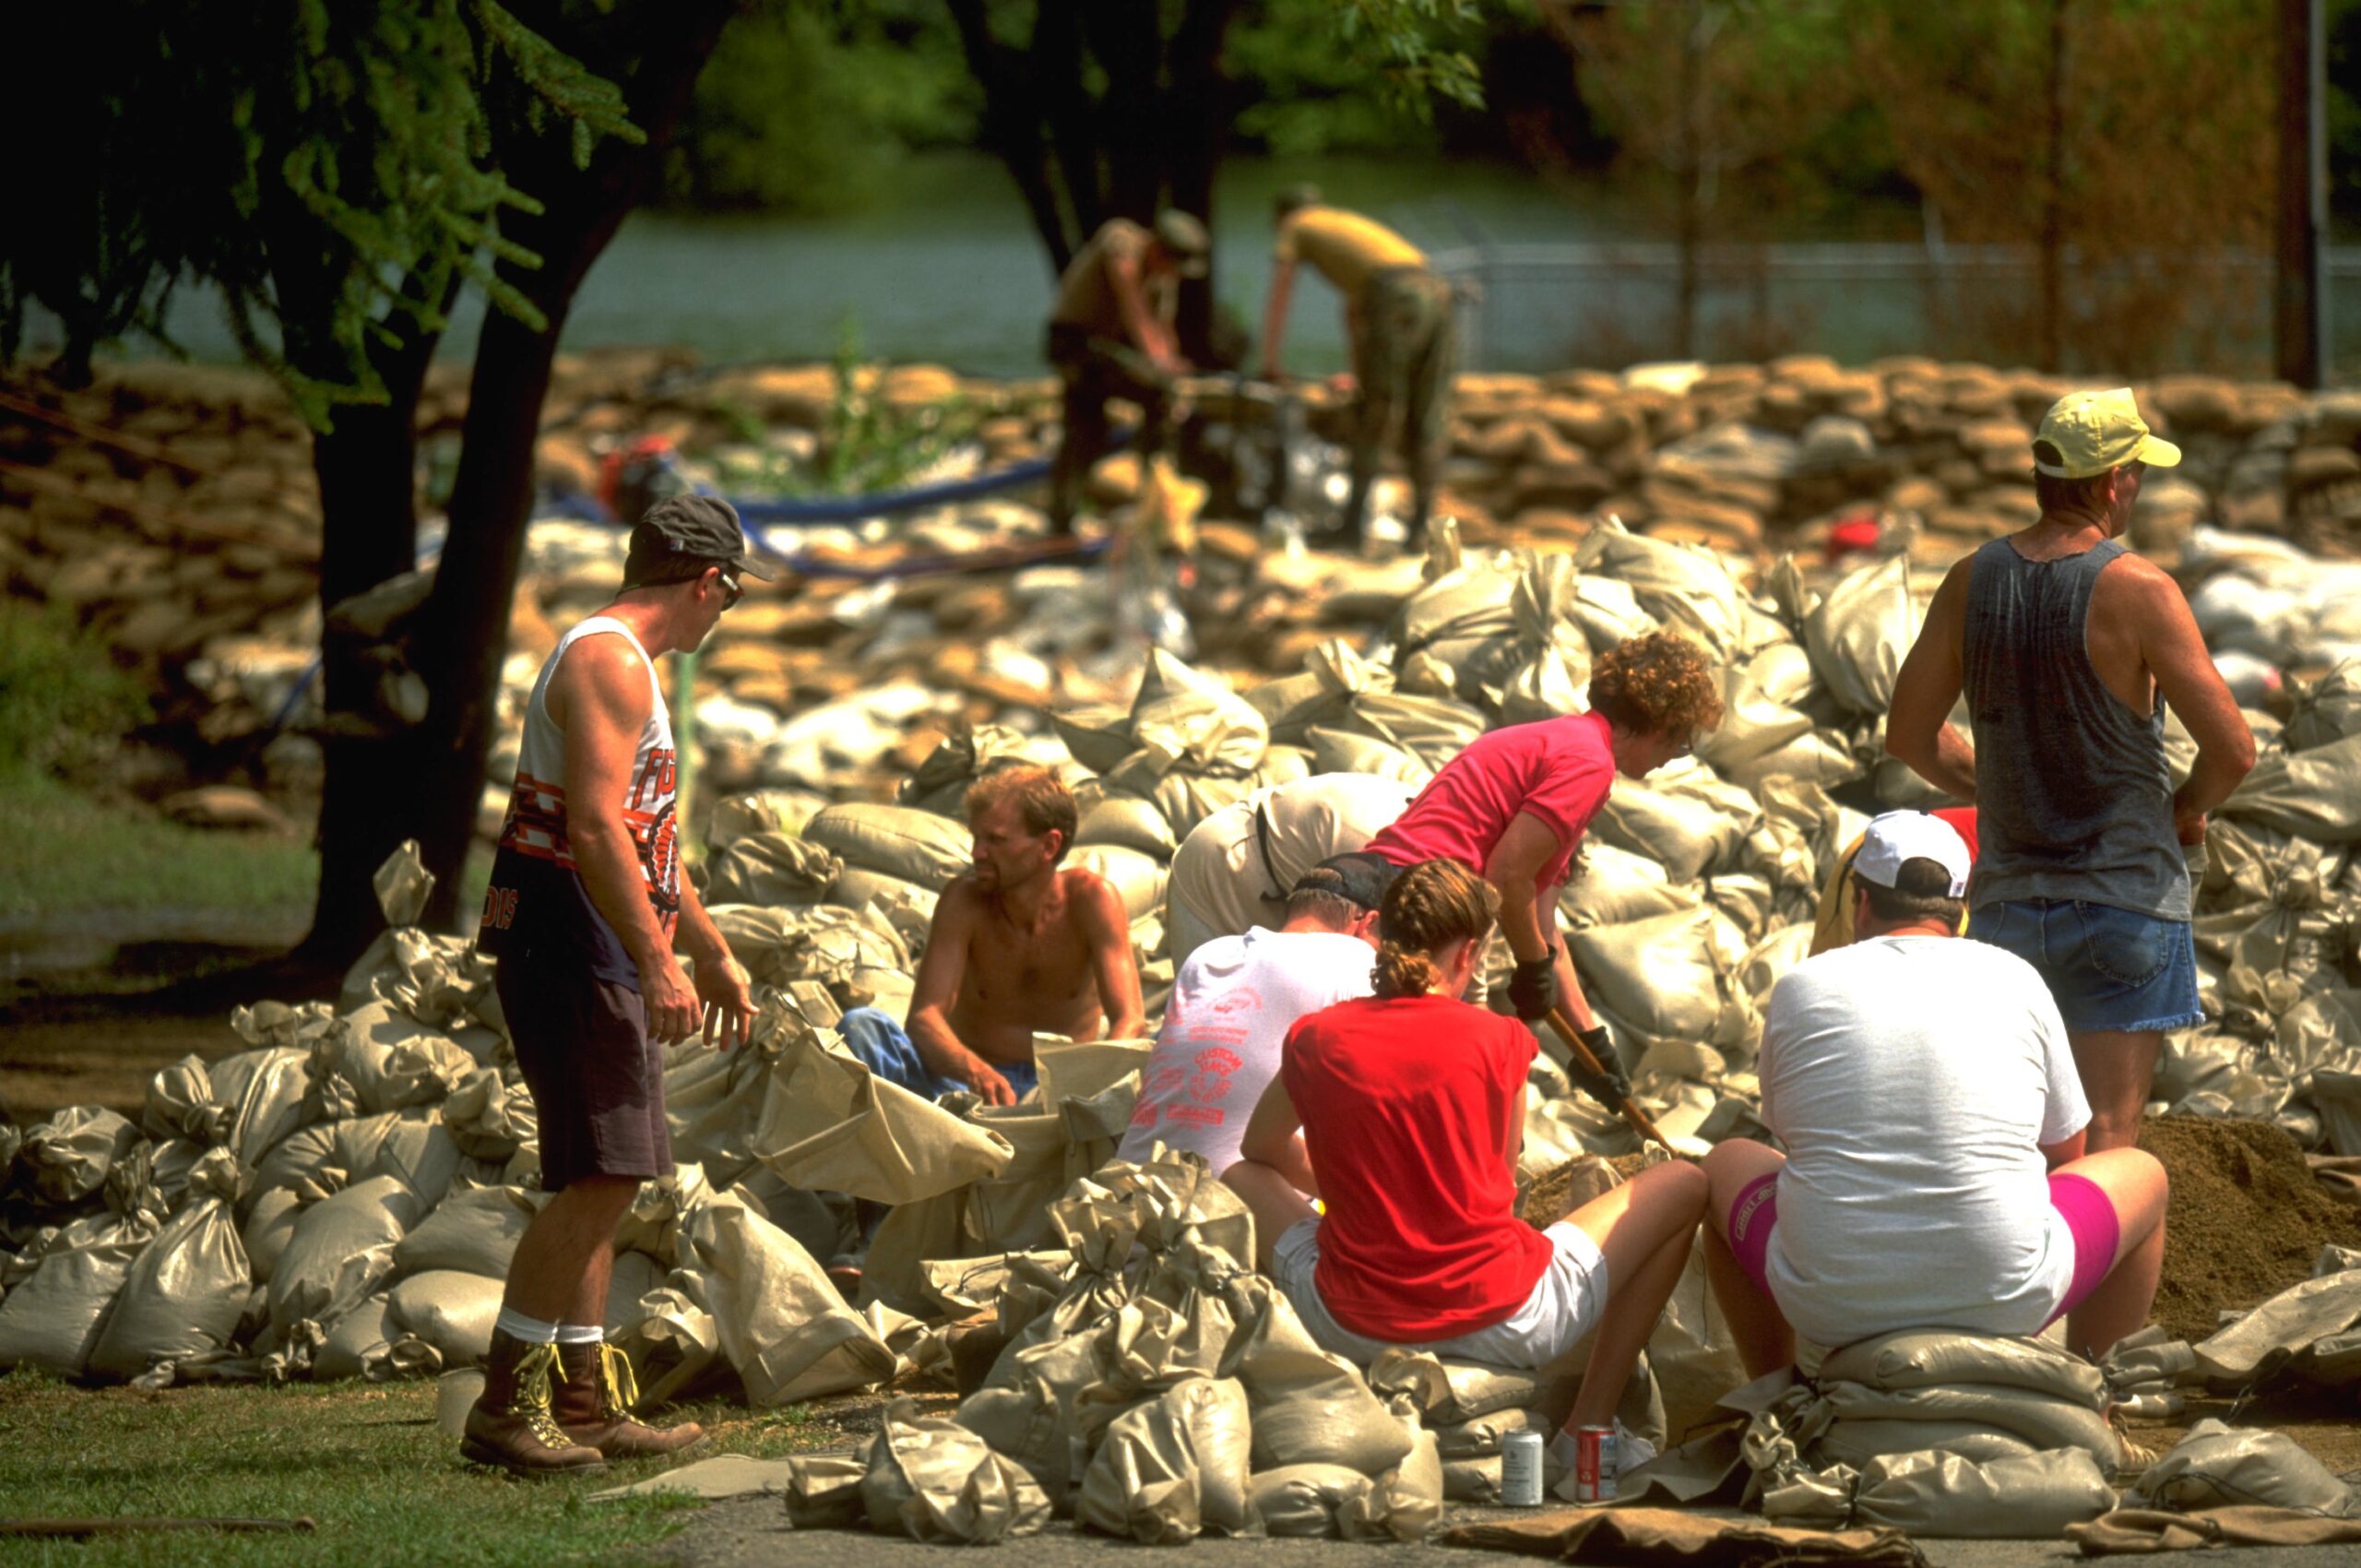 Residents and volunteers work to fill sandbags in an effort to stop the flood from causing further damage, 1993